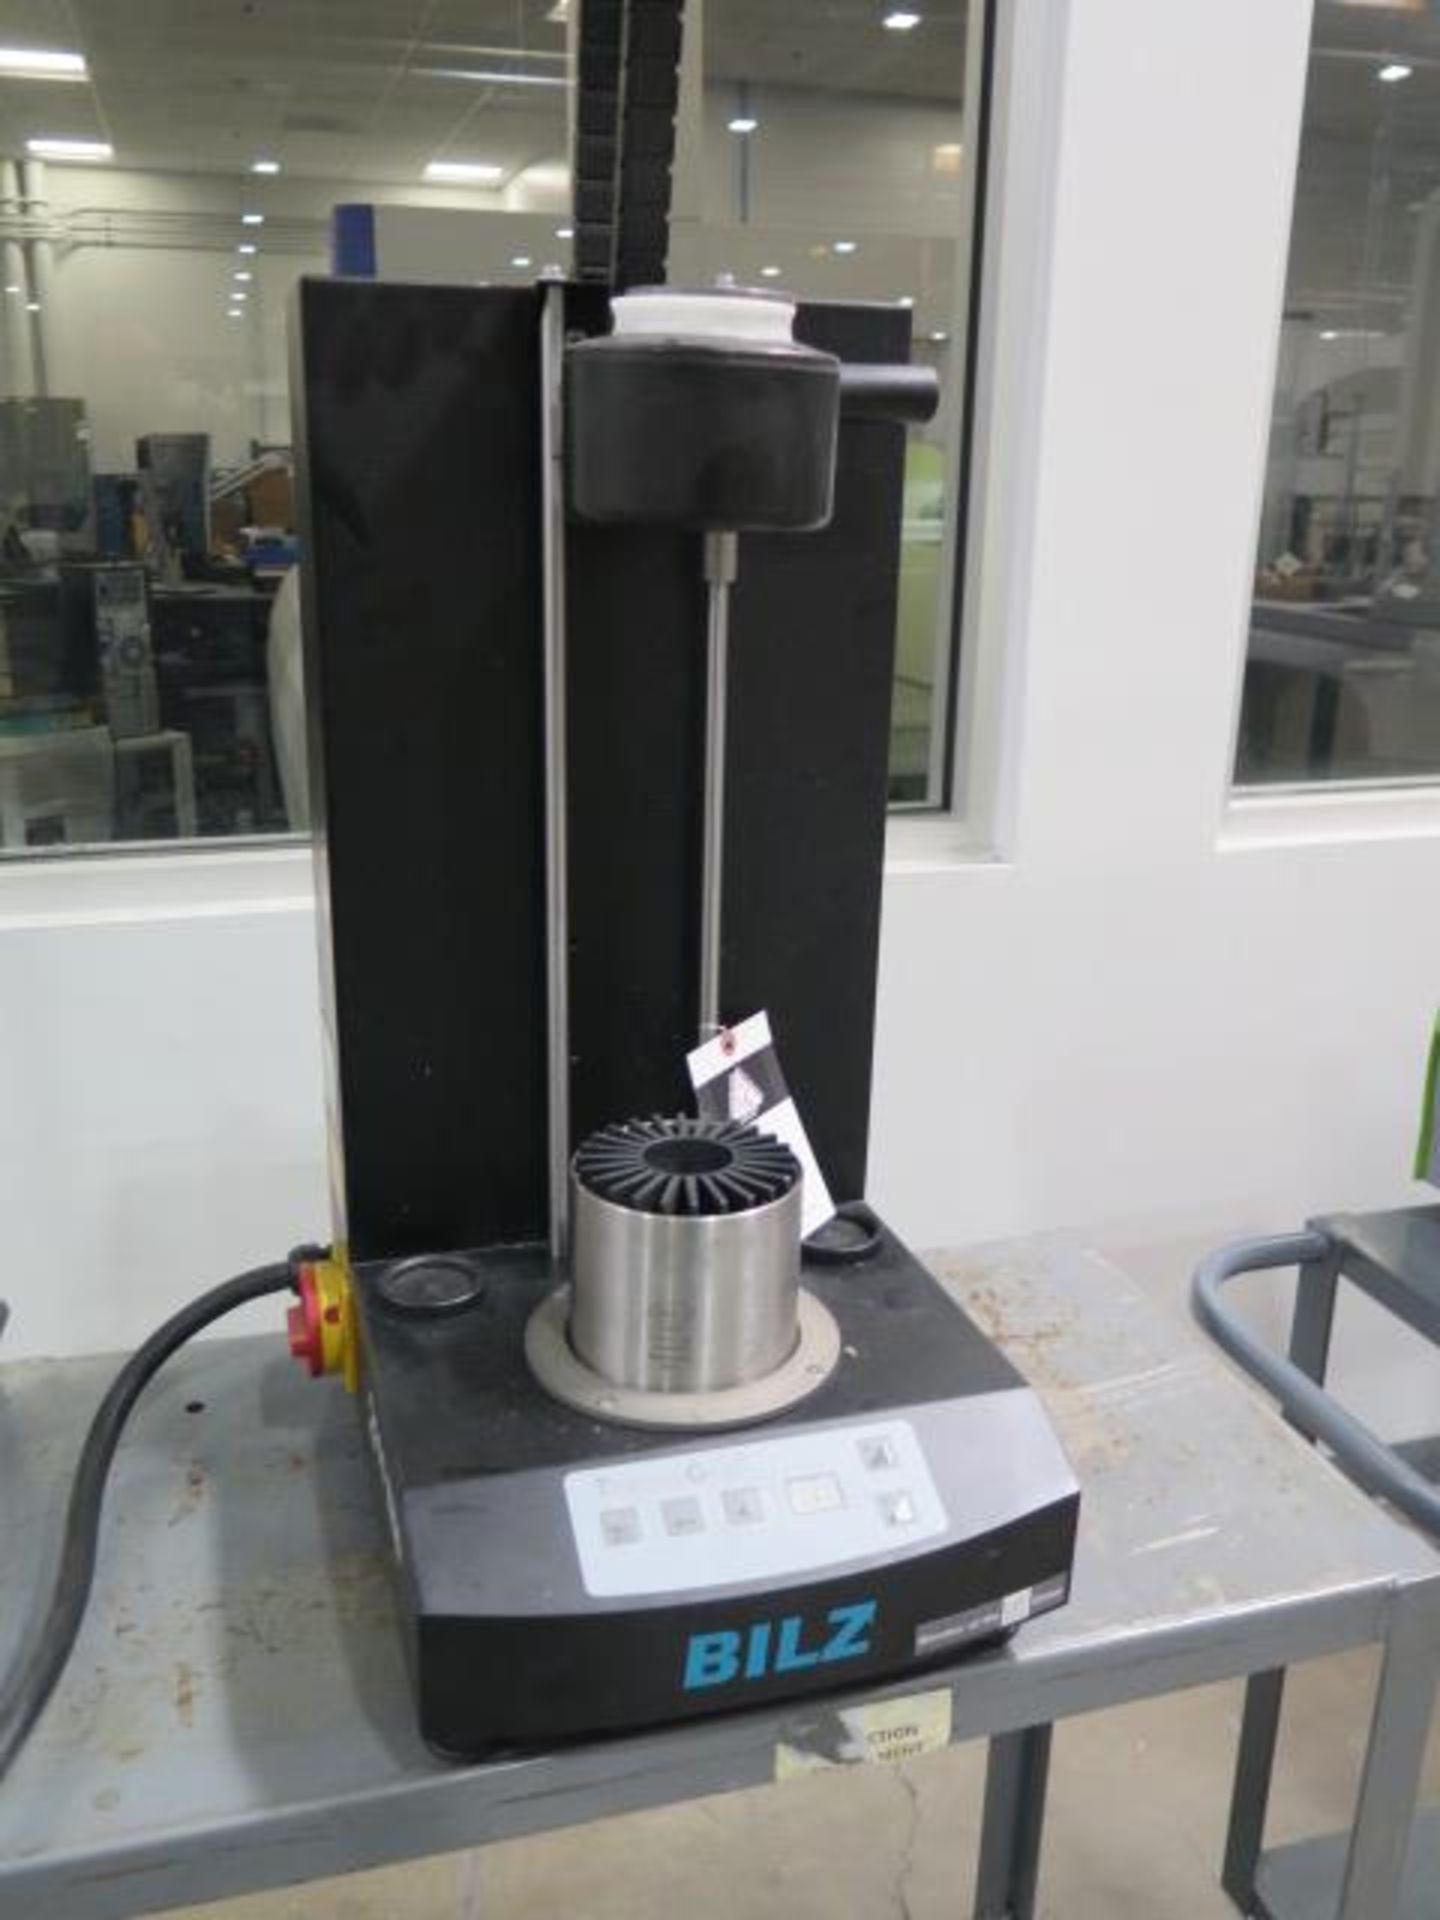 Bilz ISG 2200-208V “Thermo-Grip” Heat Shrink Tool Setting Machine (SOLD AS-IS - NO WARRANTY) - Image 2 of 8